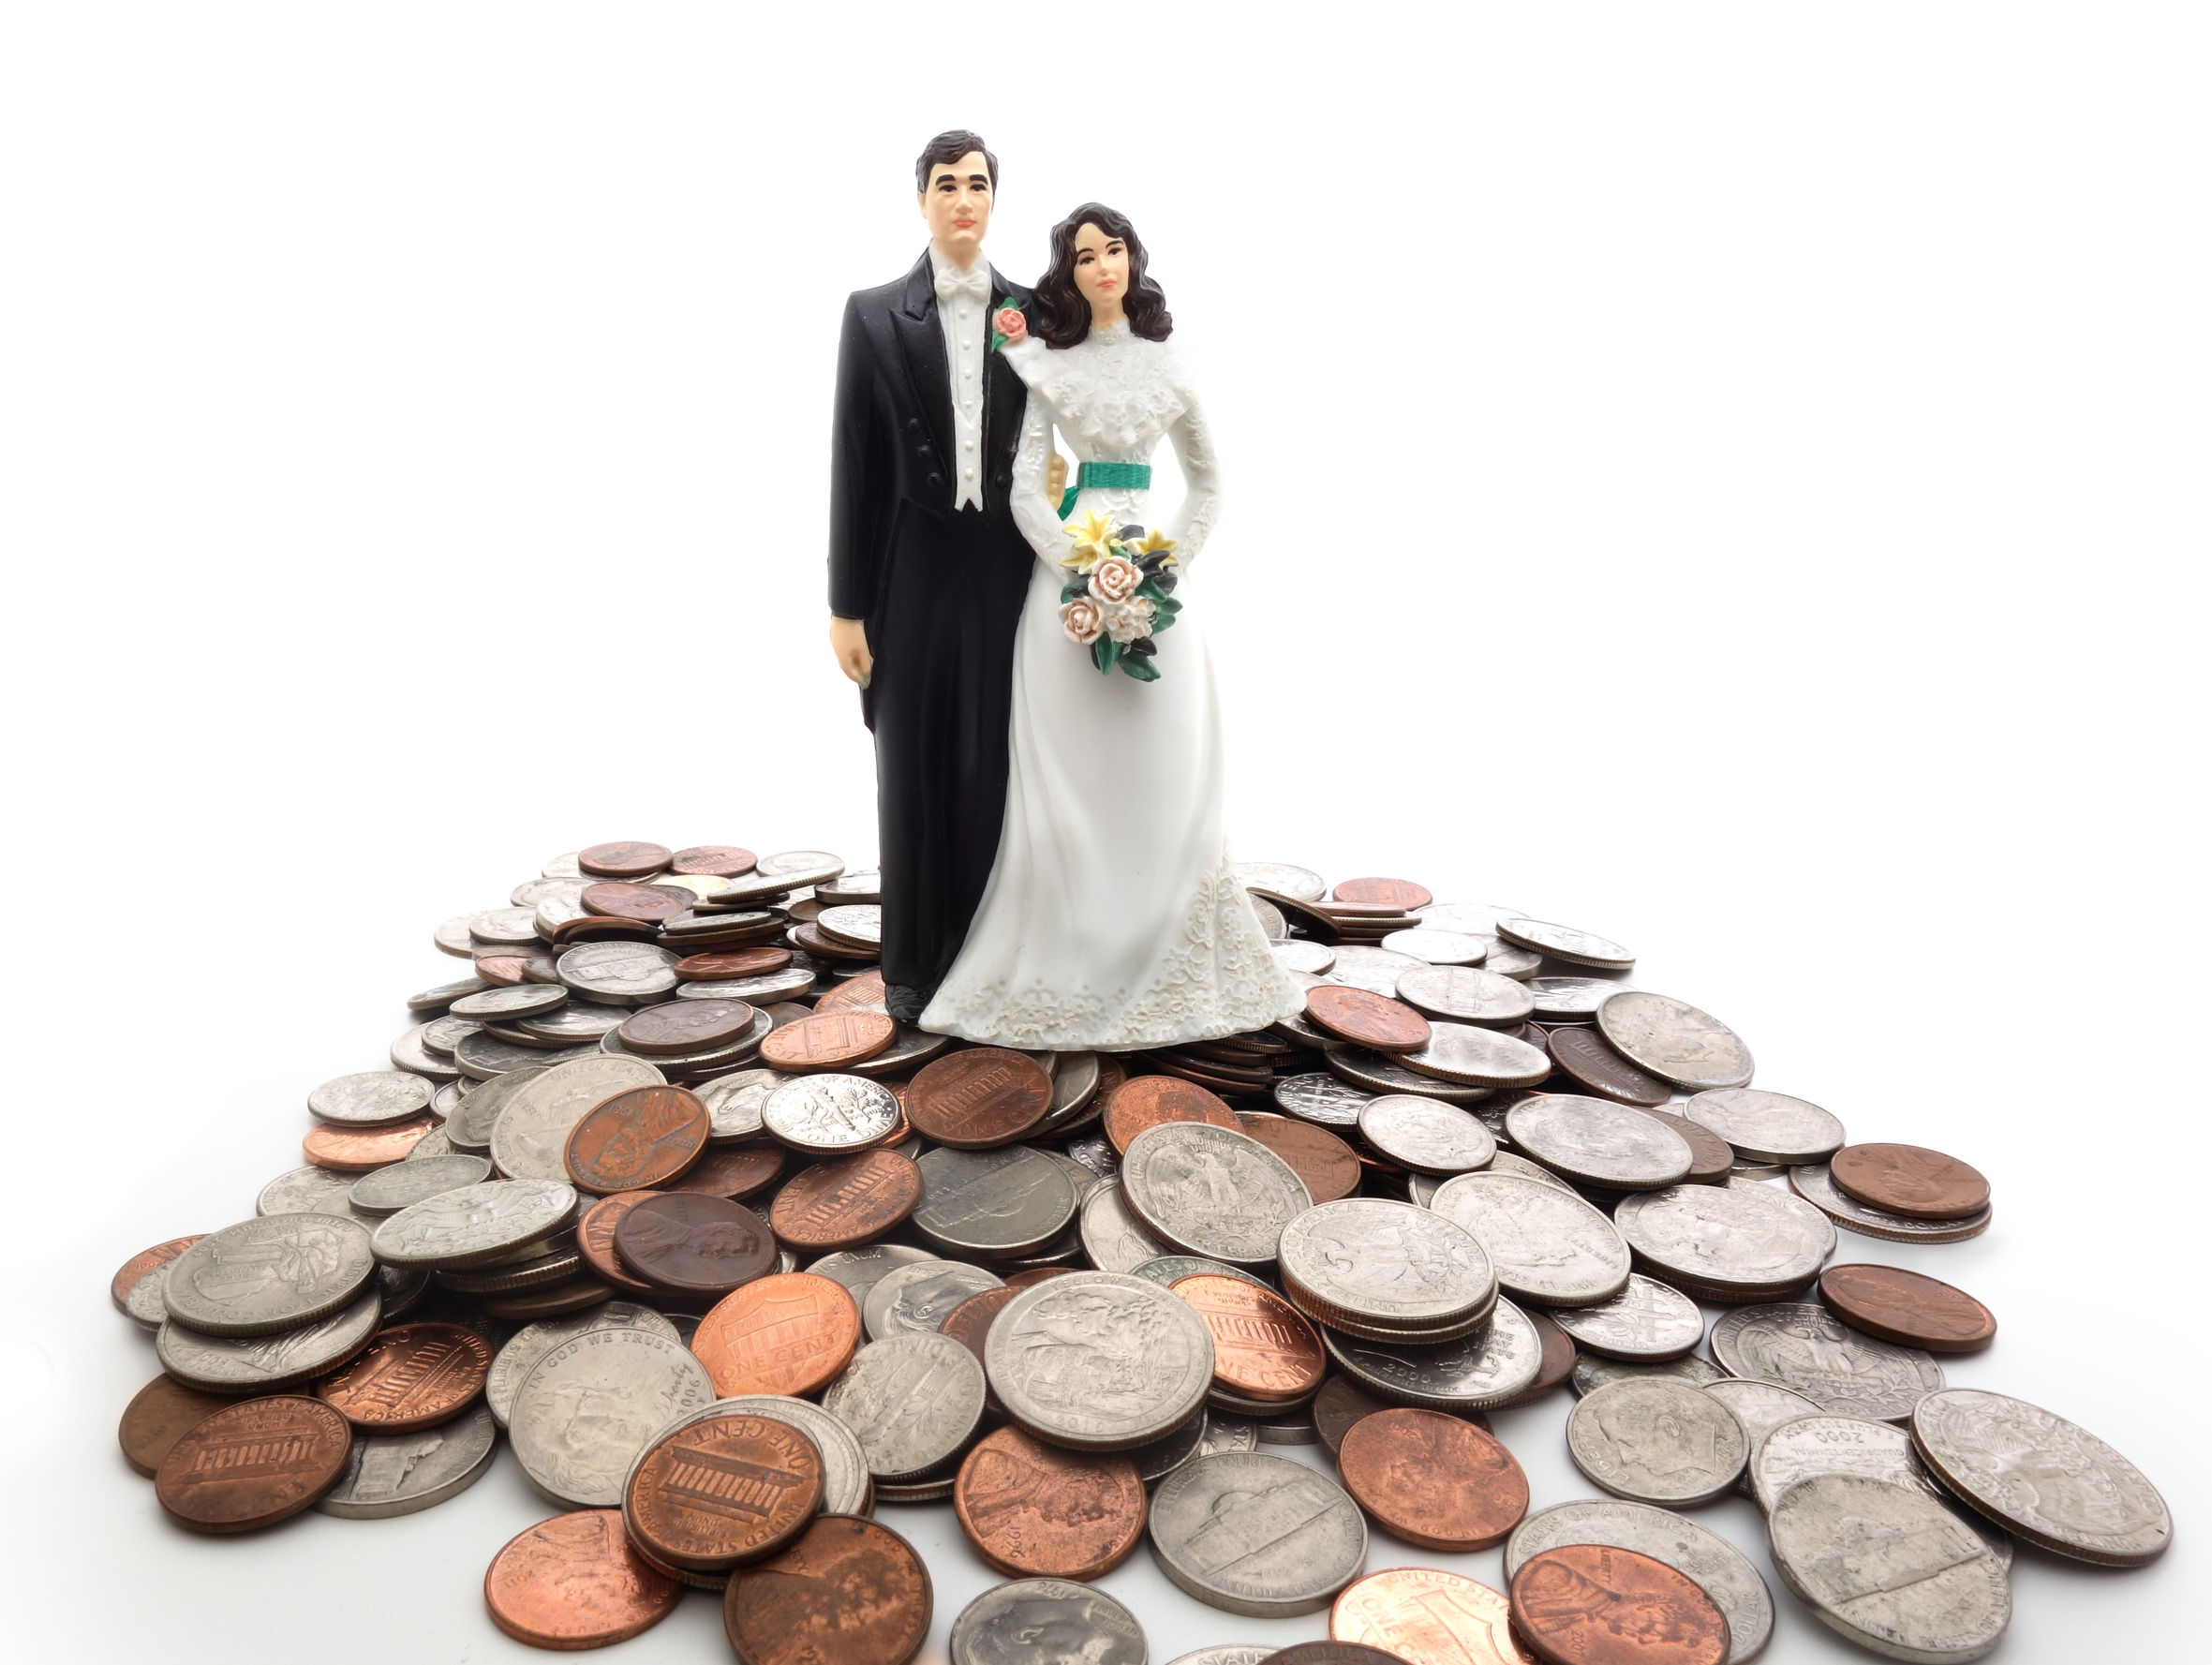 27699301 - plastic wedding couple on a pile of coins - money concept